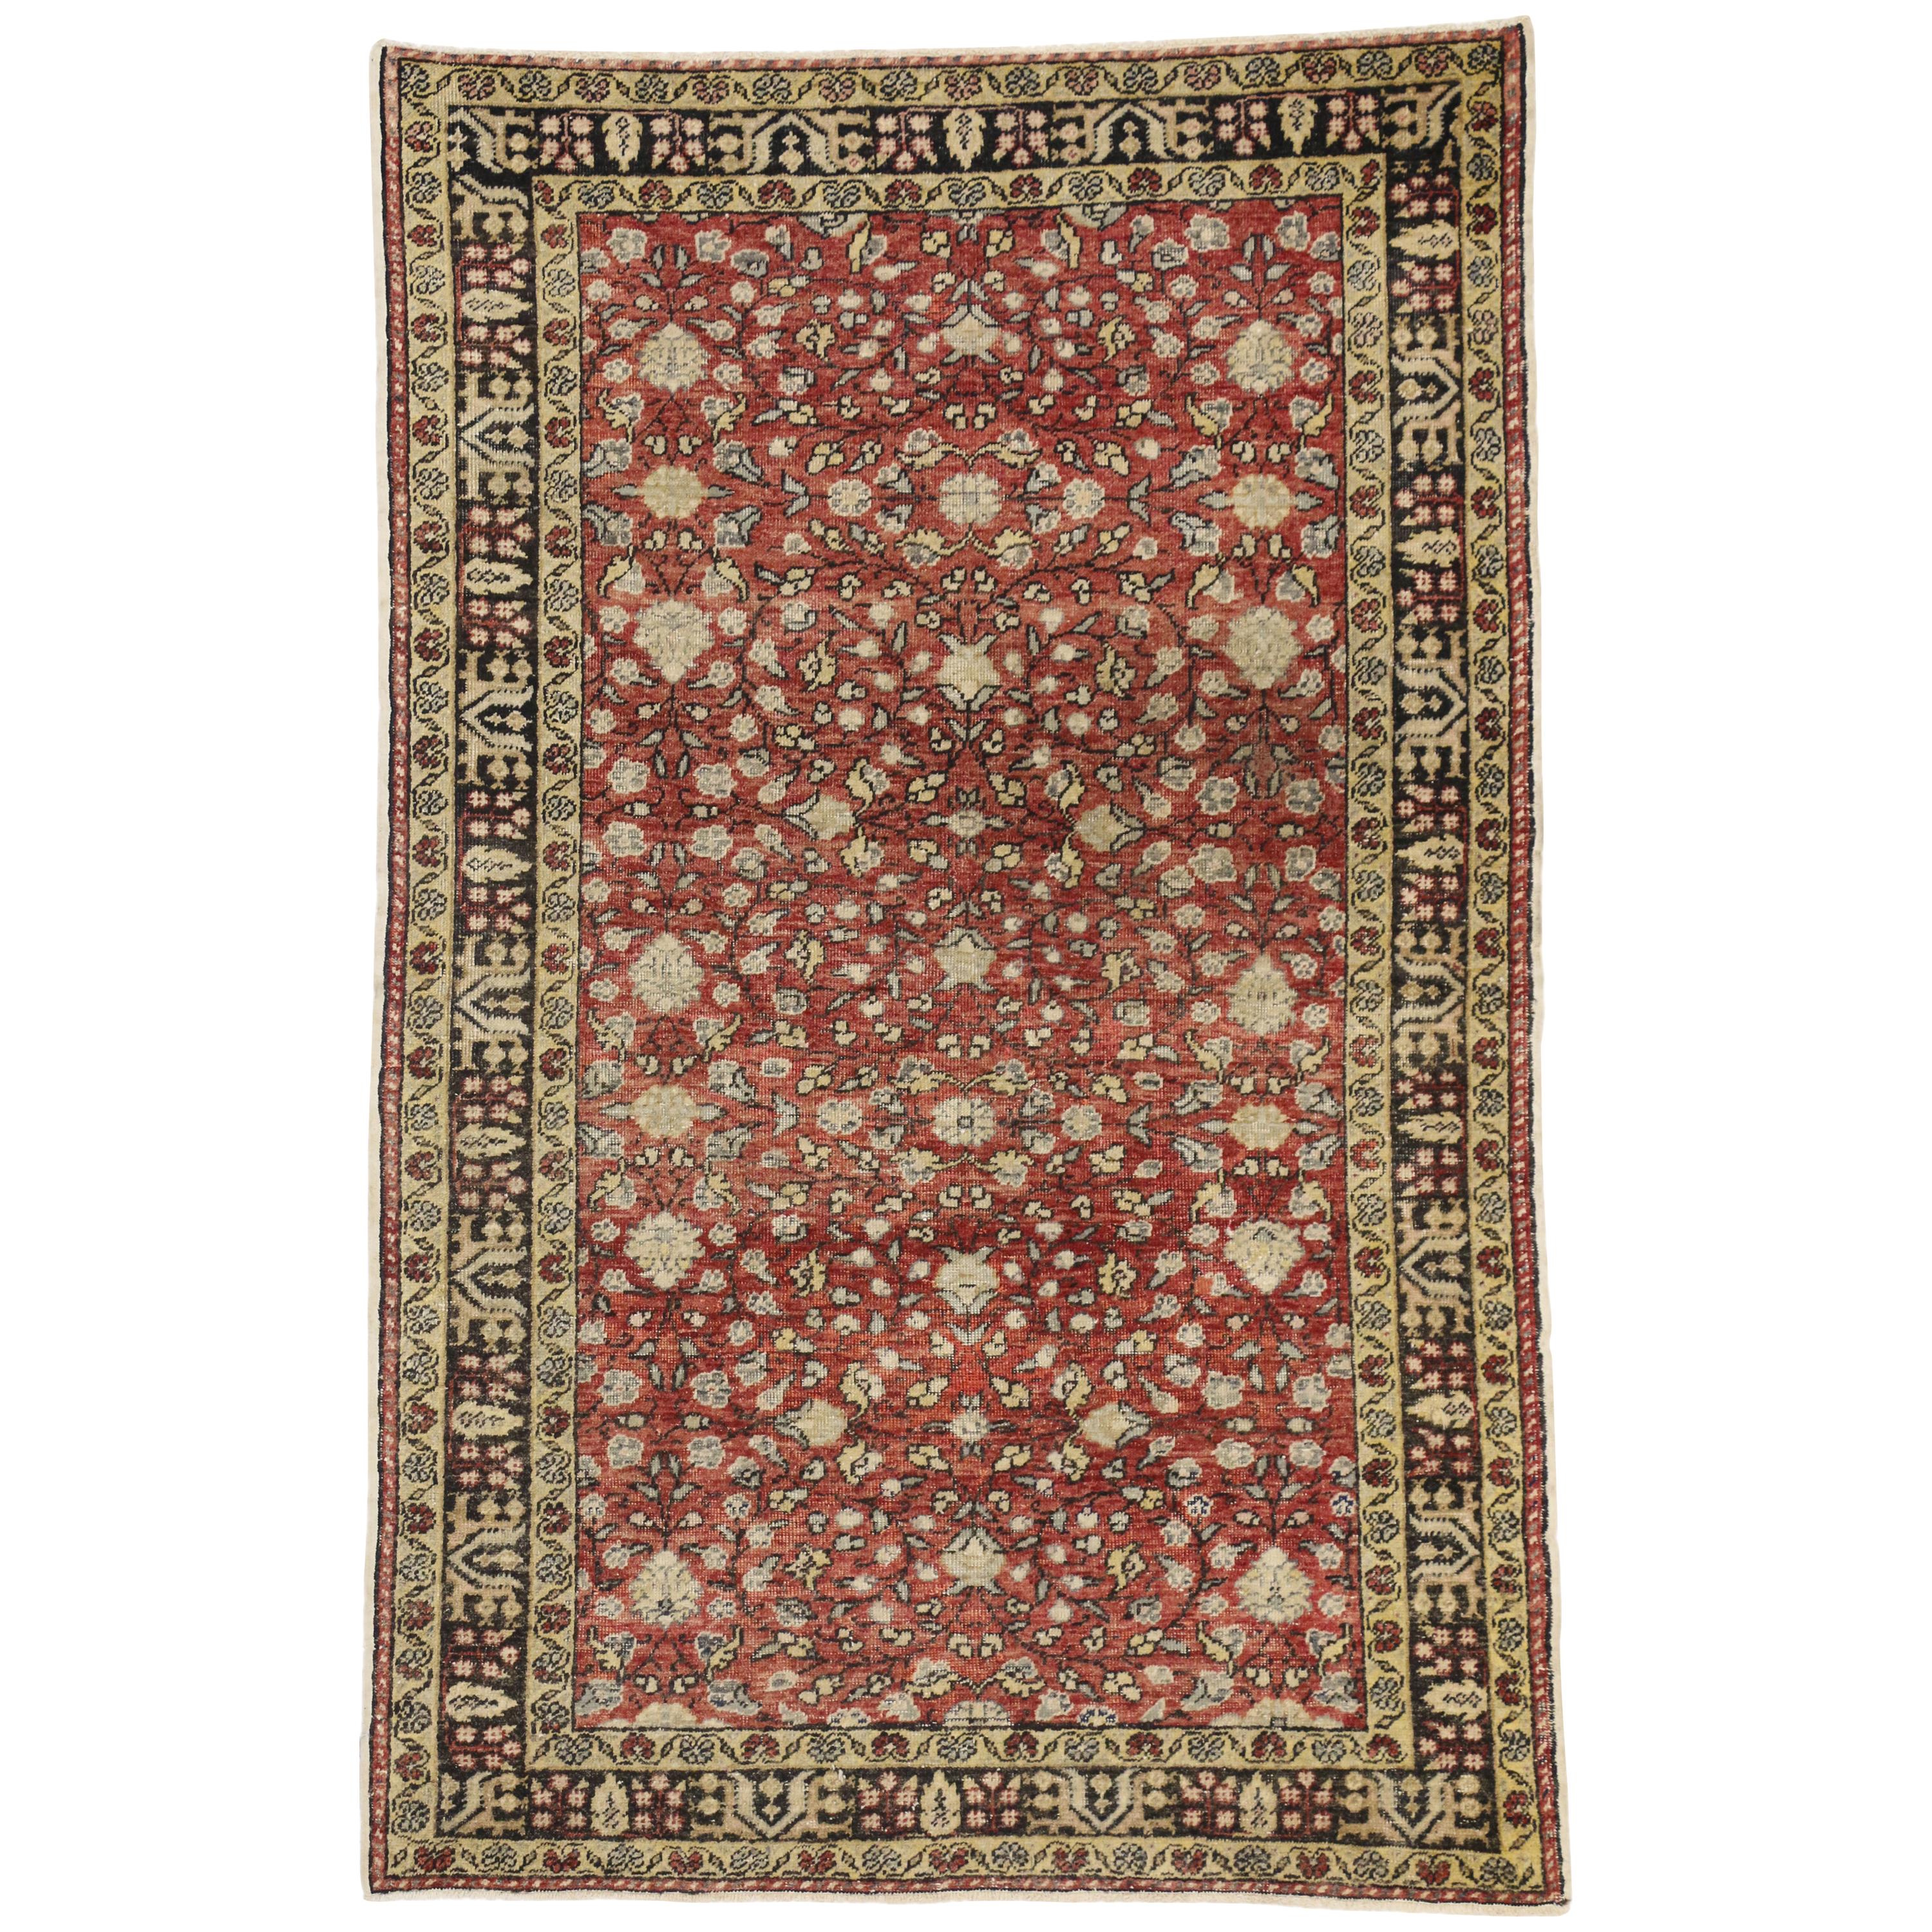 Distressed Vintage Turkish Sivas Rug with Shabby Chic Rustic Art Nouveau Style